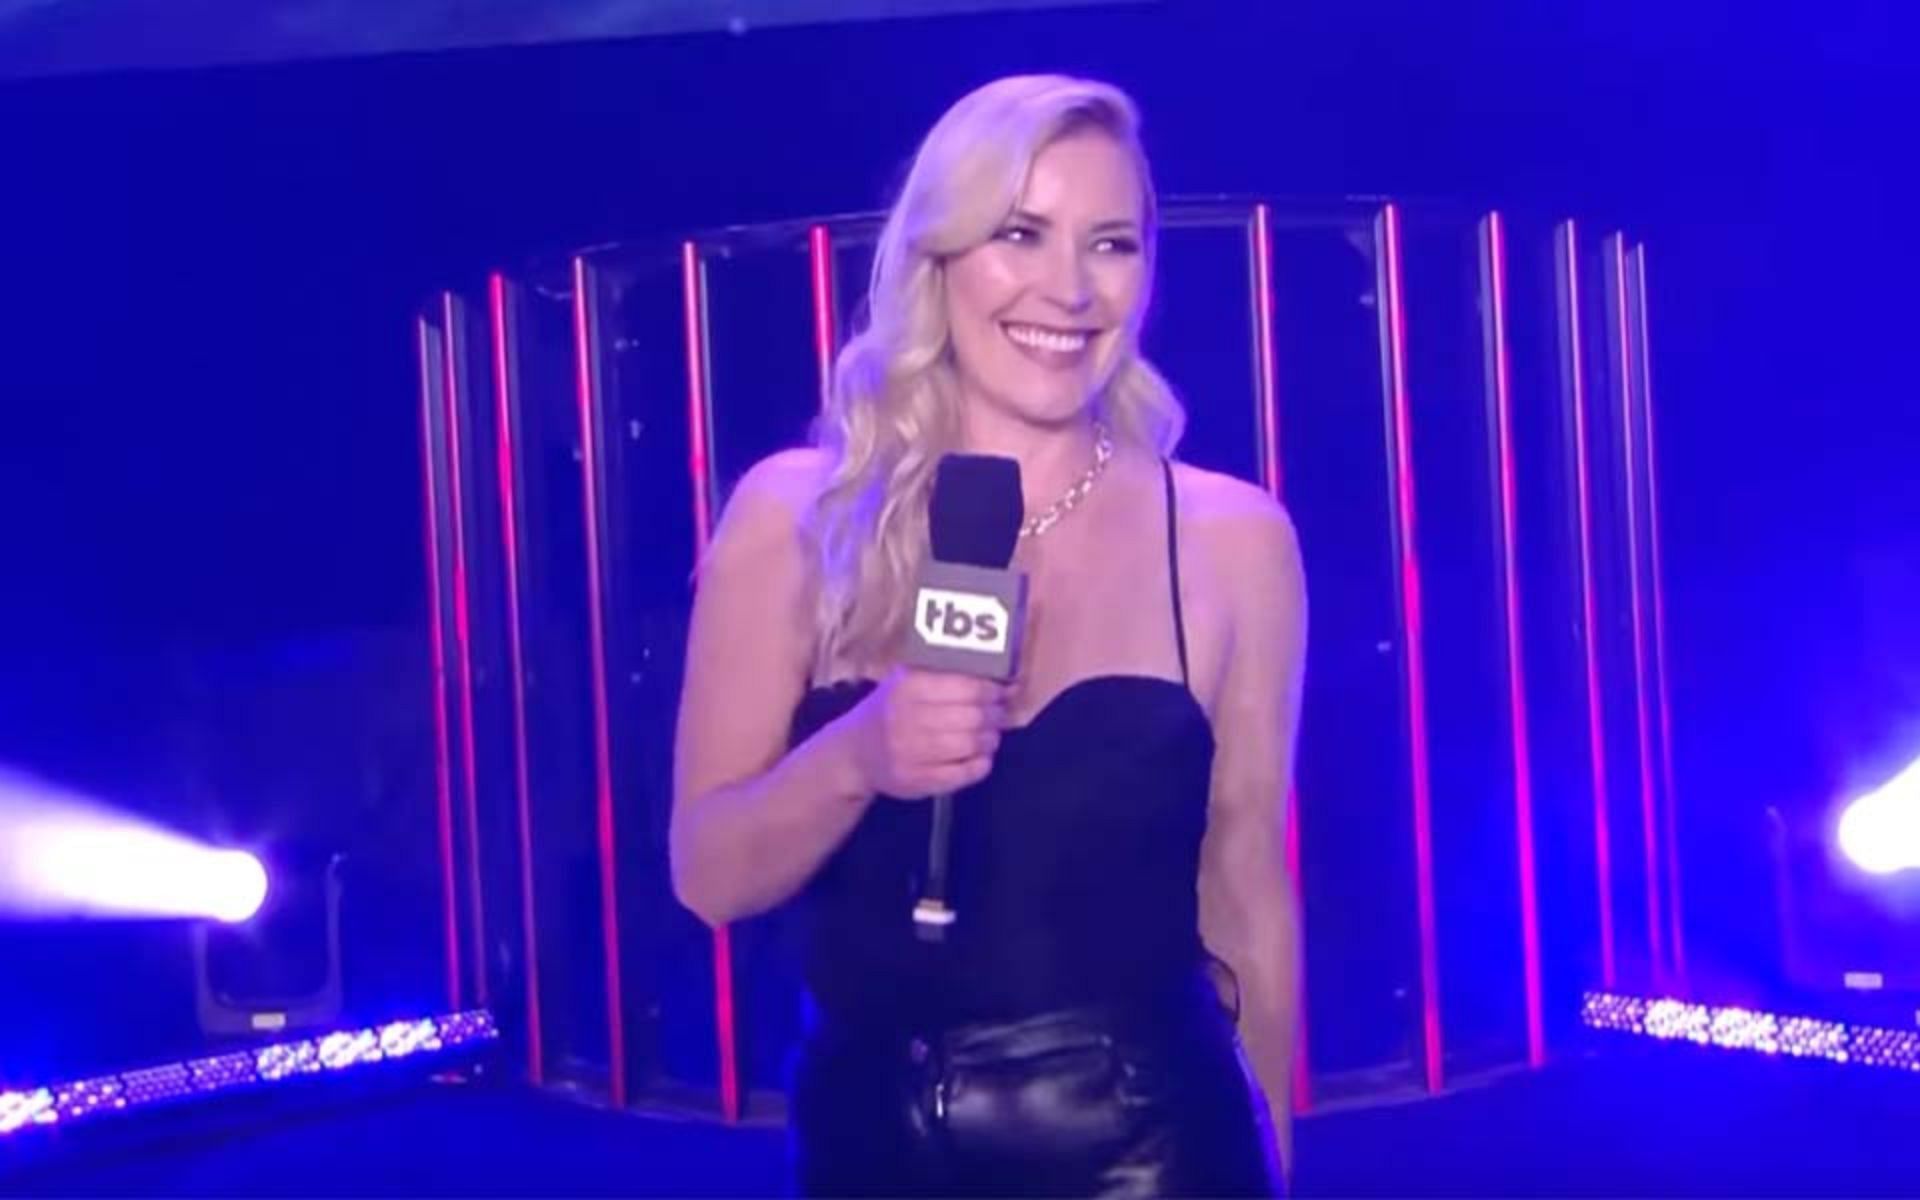 Renee Paquette was greeted with rousing ovation from Toronto crowd last night on AEW Dynamite.